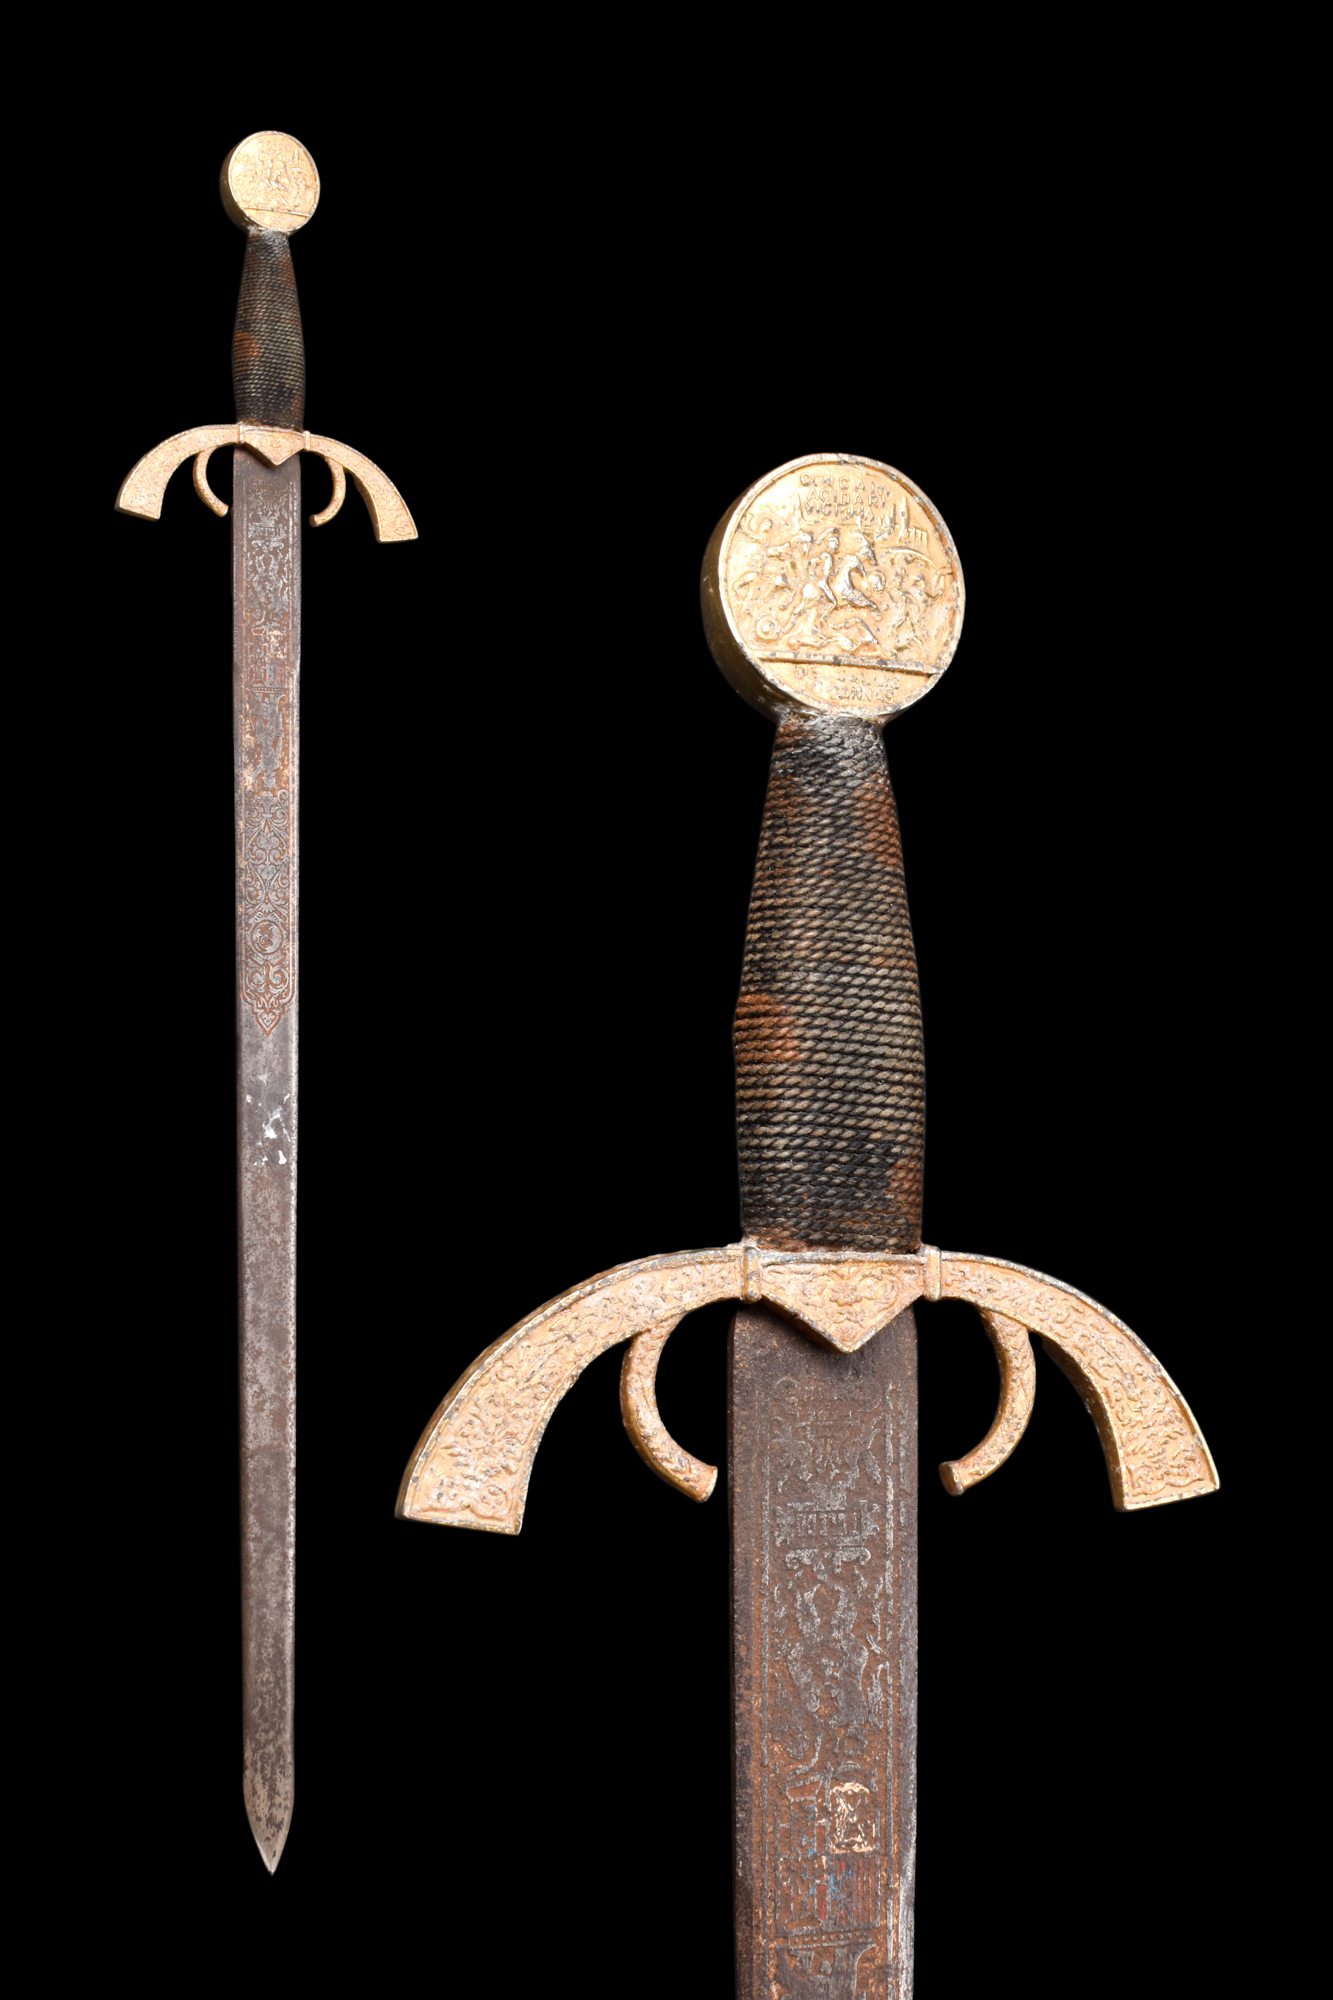 A SWORD IN 15TH CENTURY STYLE